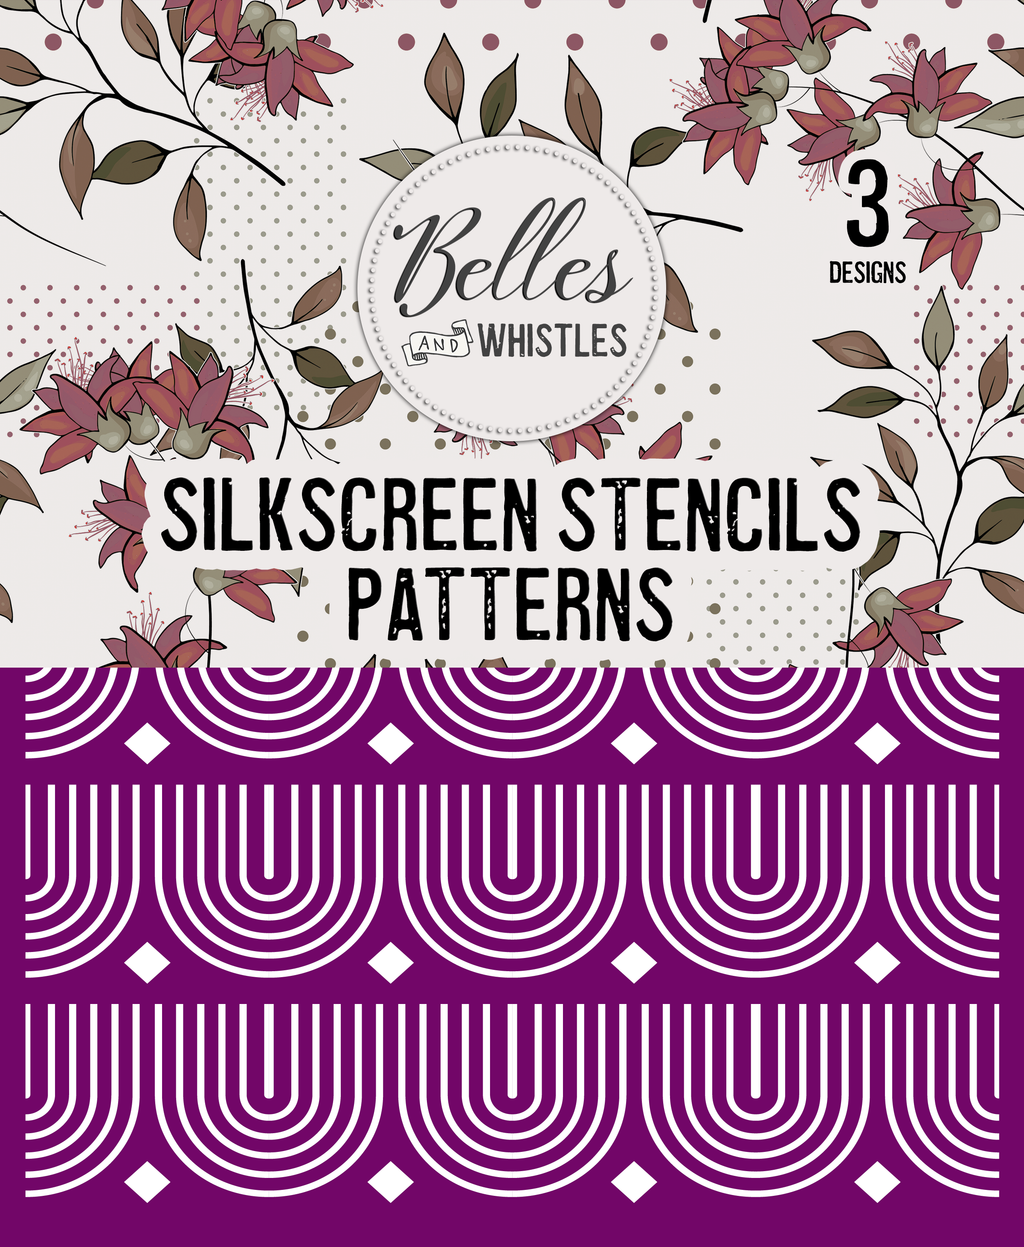 Patterns Silkscreen Stencil Package - Belles And Whistles